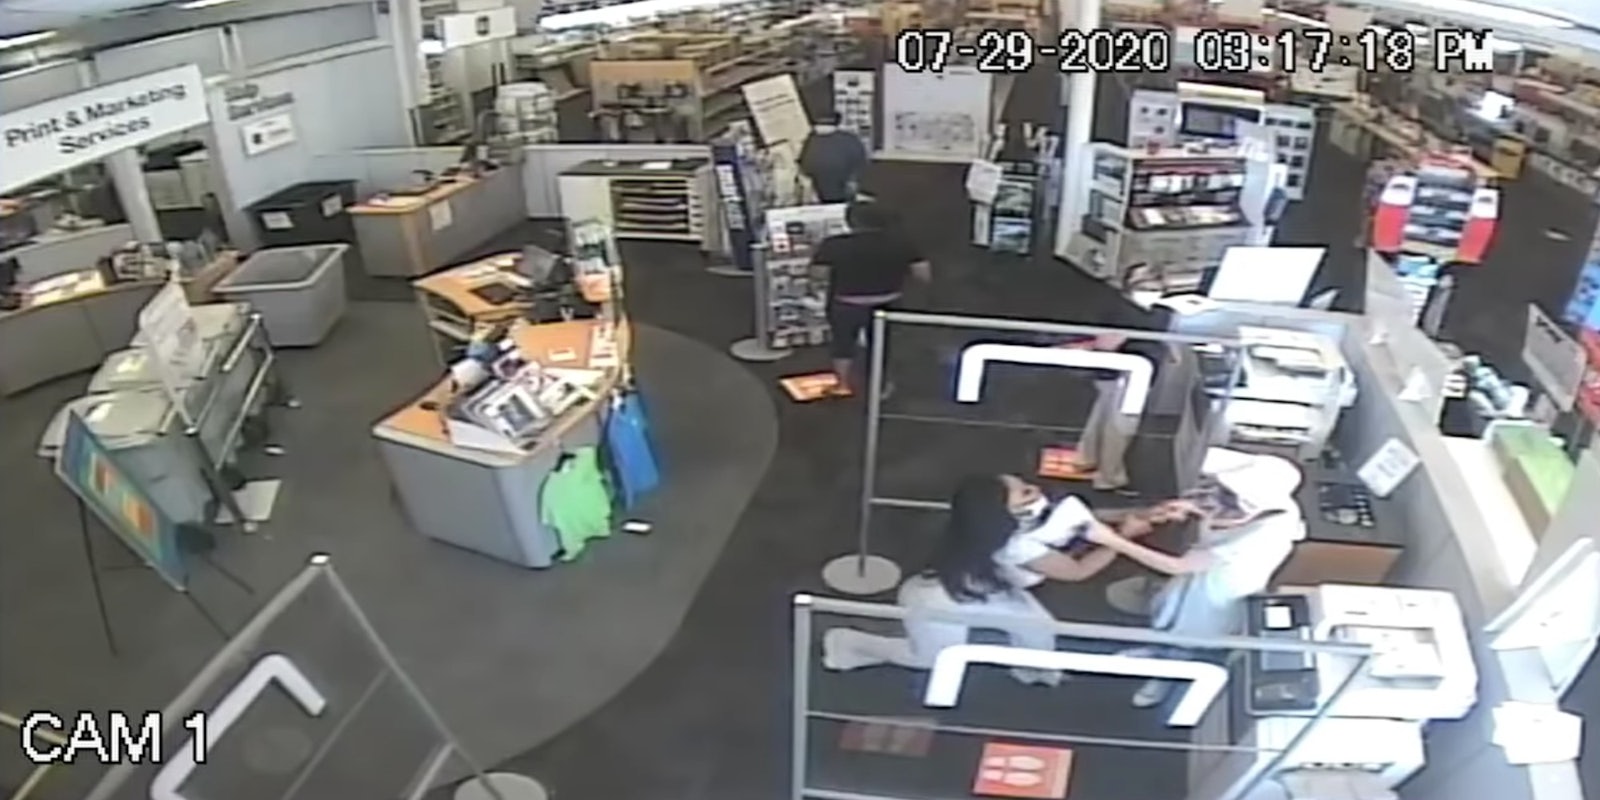 Surveillance video of an altercation at a Staples